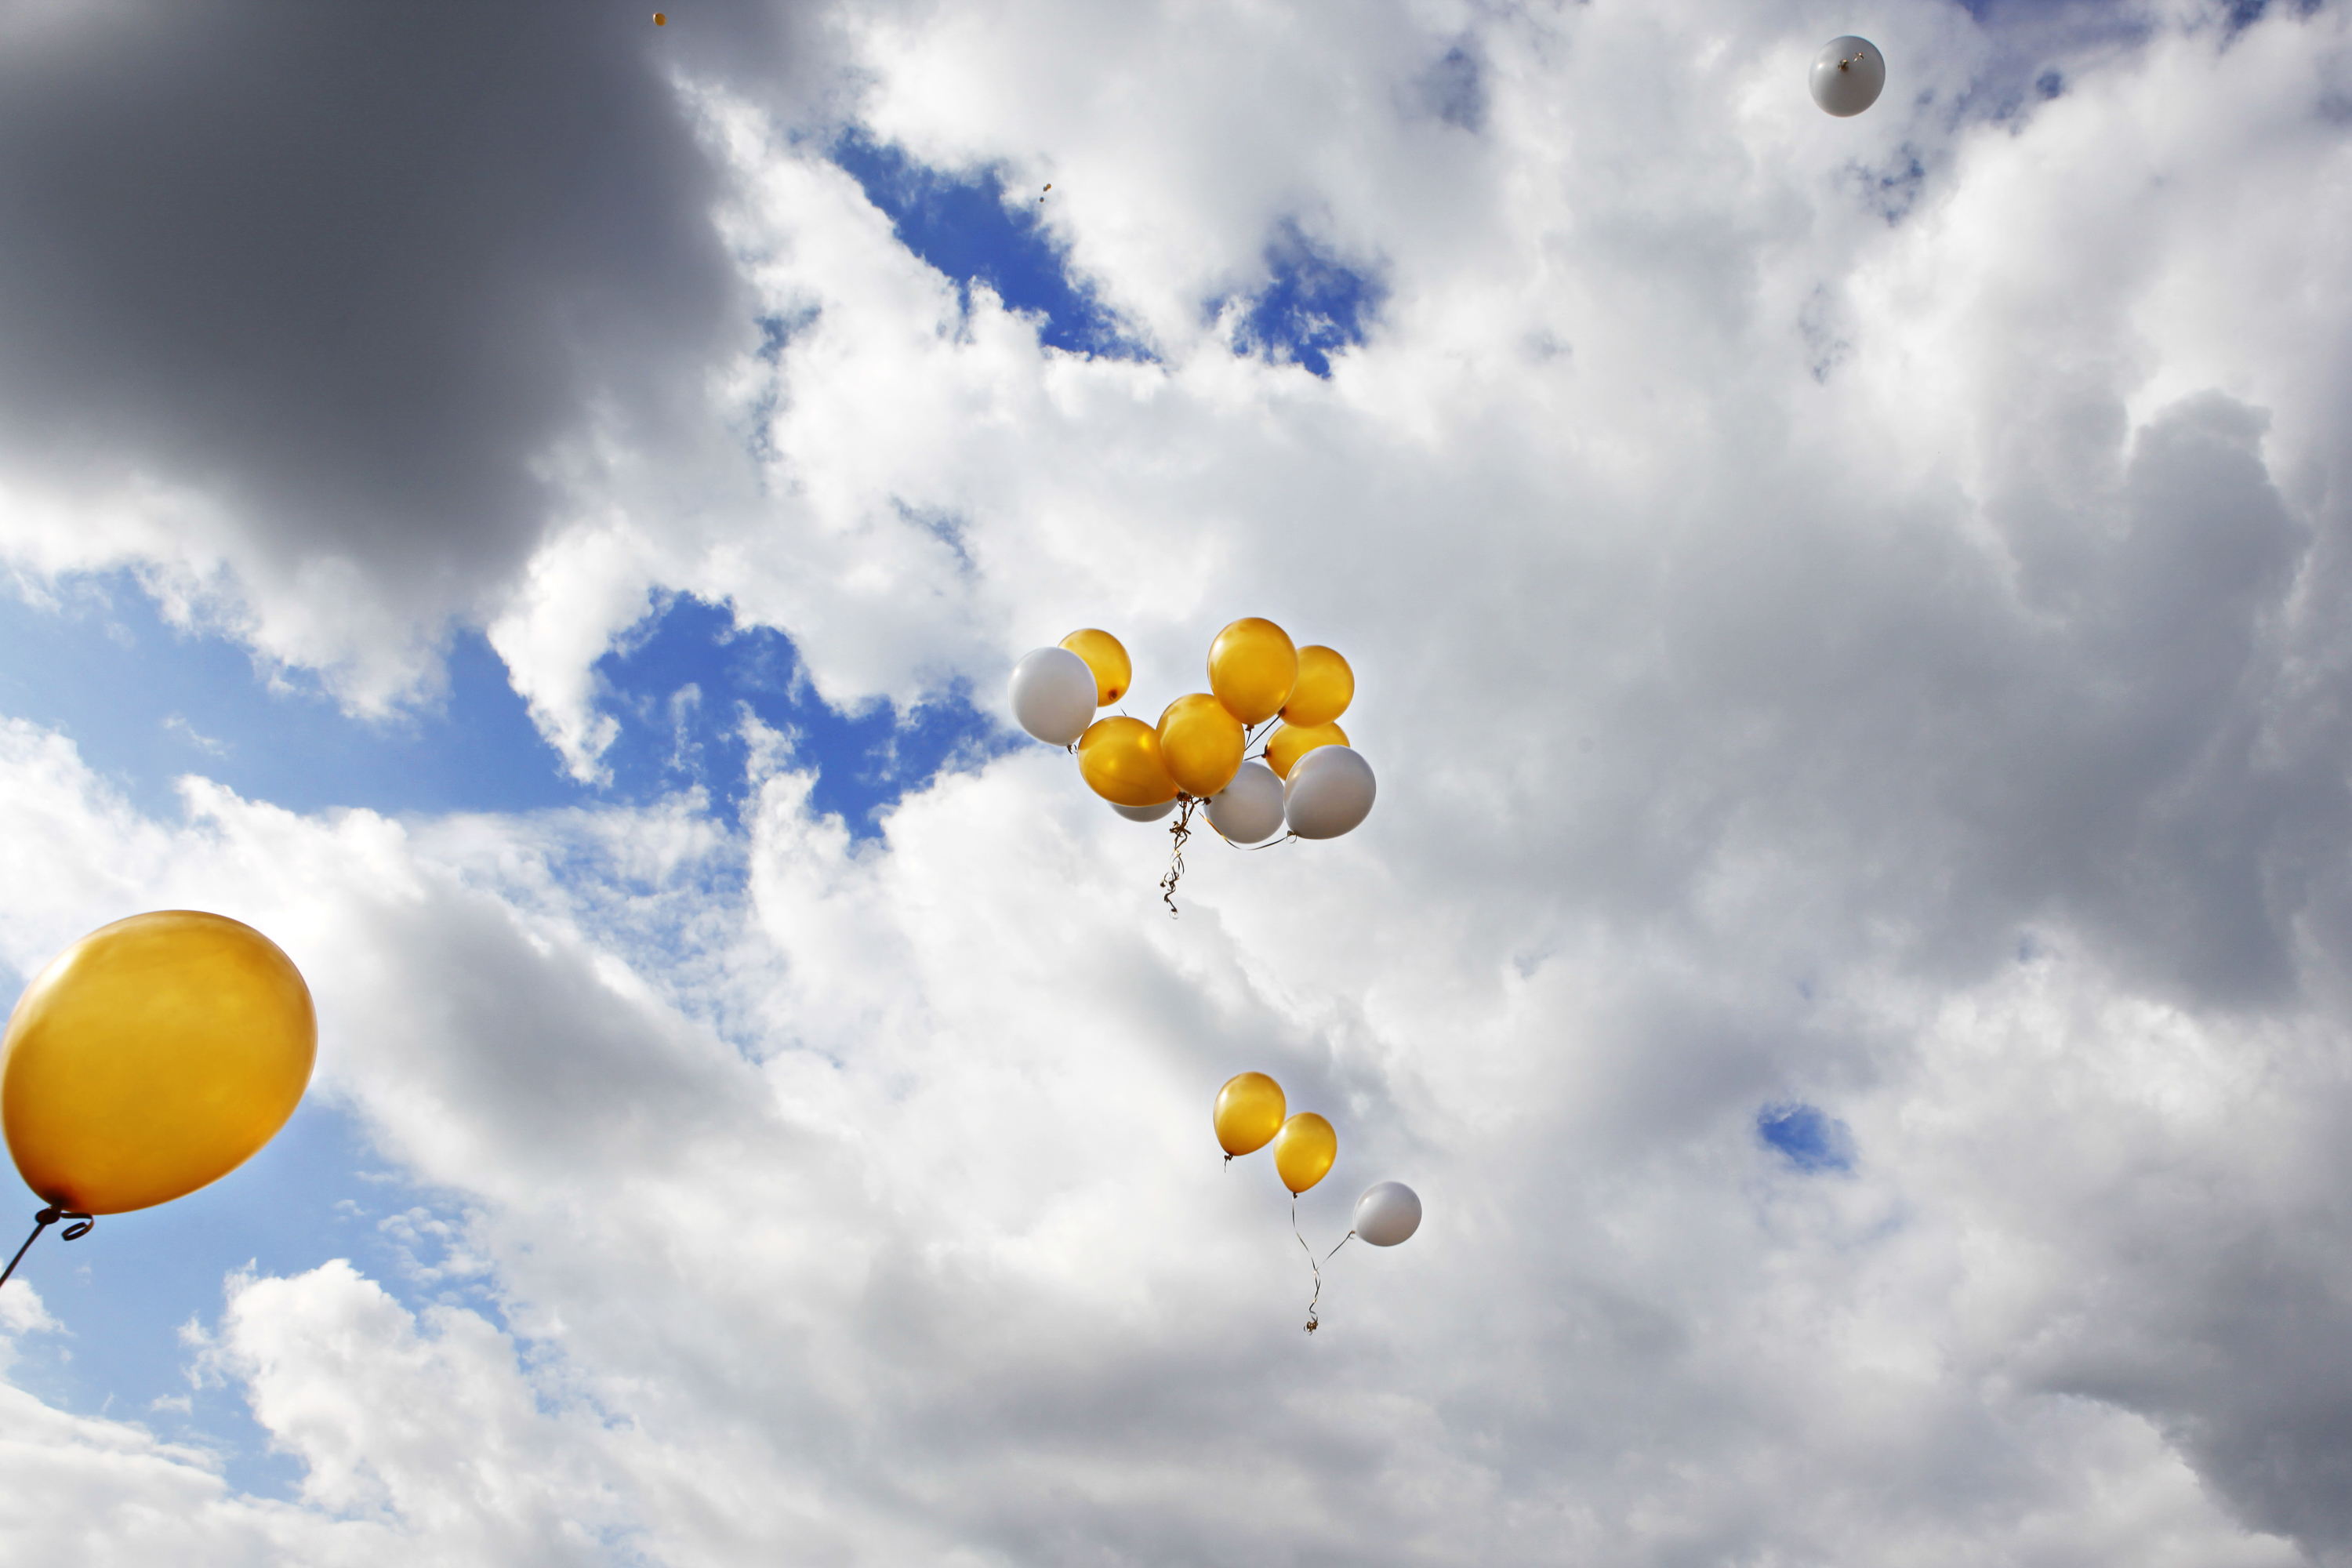 Balloons Against the Sky, Balloons, Clouds, Floating, Helium, HQ Photo